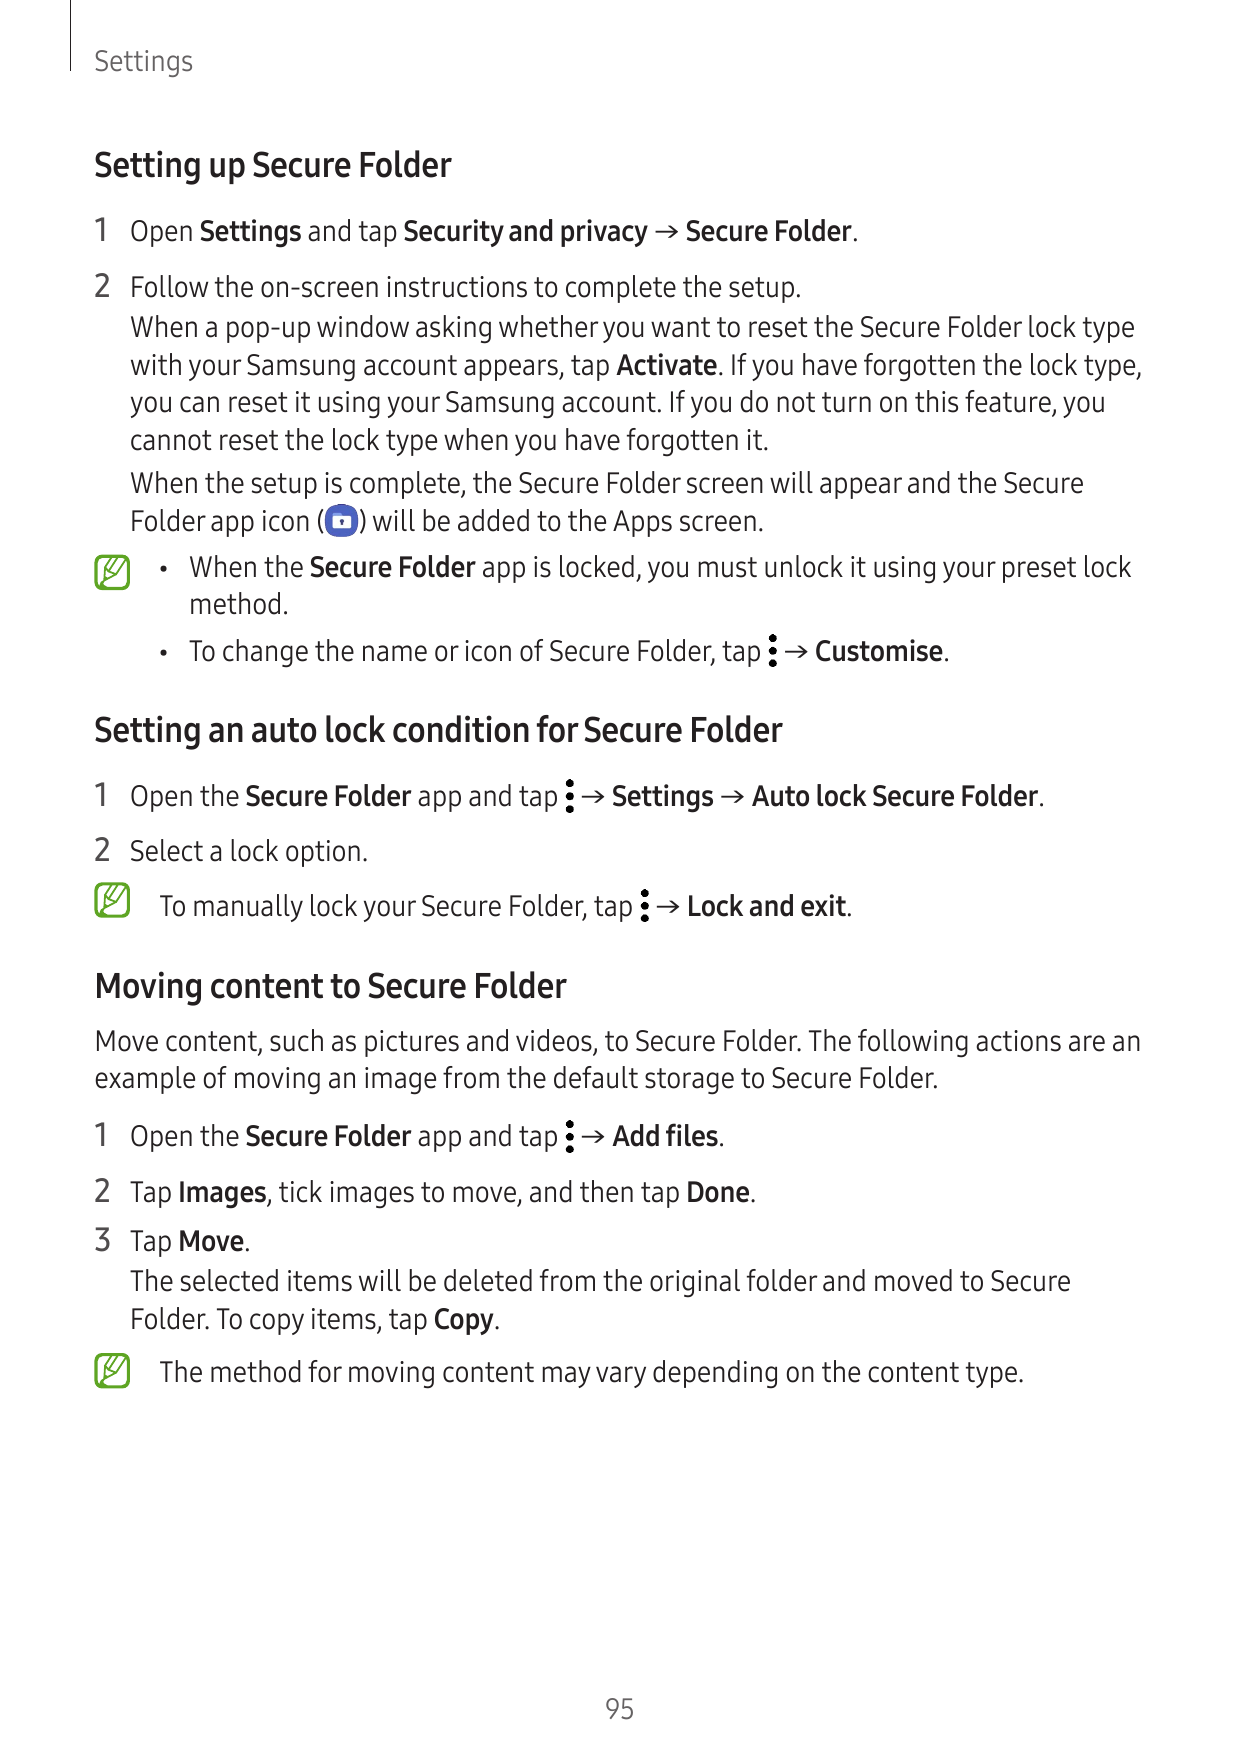 SettingsSetting up Secure Folder1 Open Settings and tap Security and privacy → Secure Folder.2 Follow the on-screen instructions